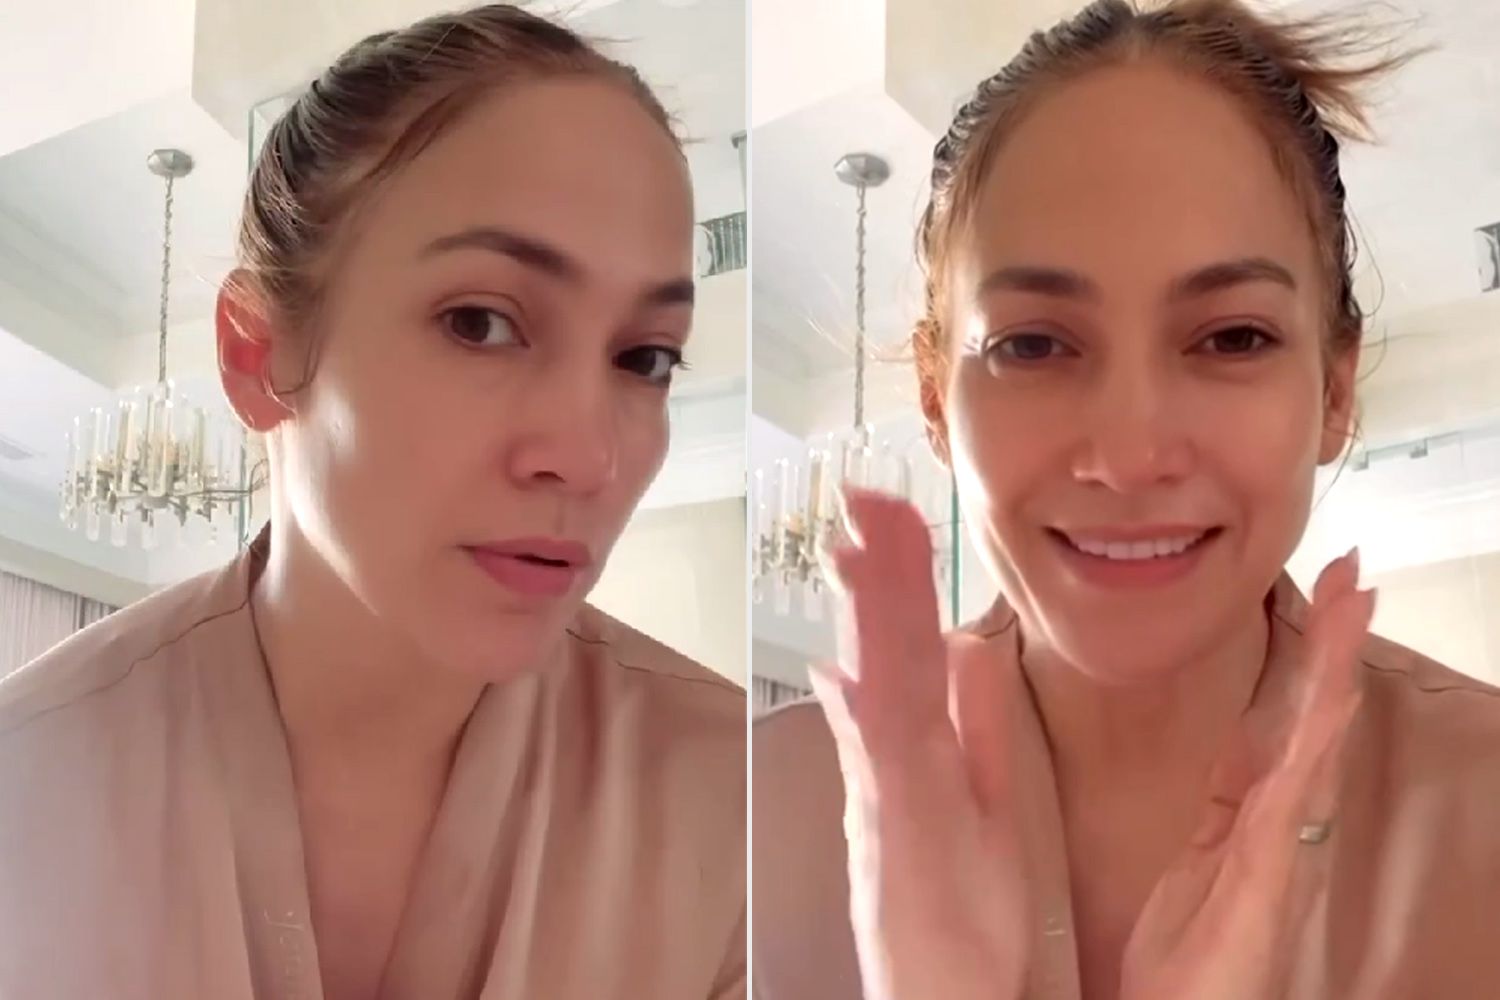 Jennifer Lopez Shows Off Her Natural Beauty in Makeup-Free Video: ‘This Is…54’